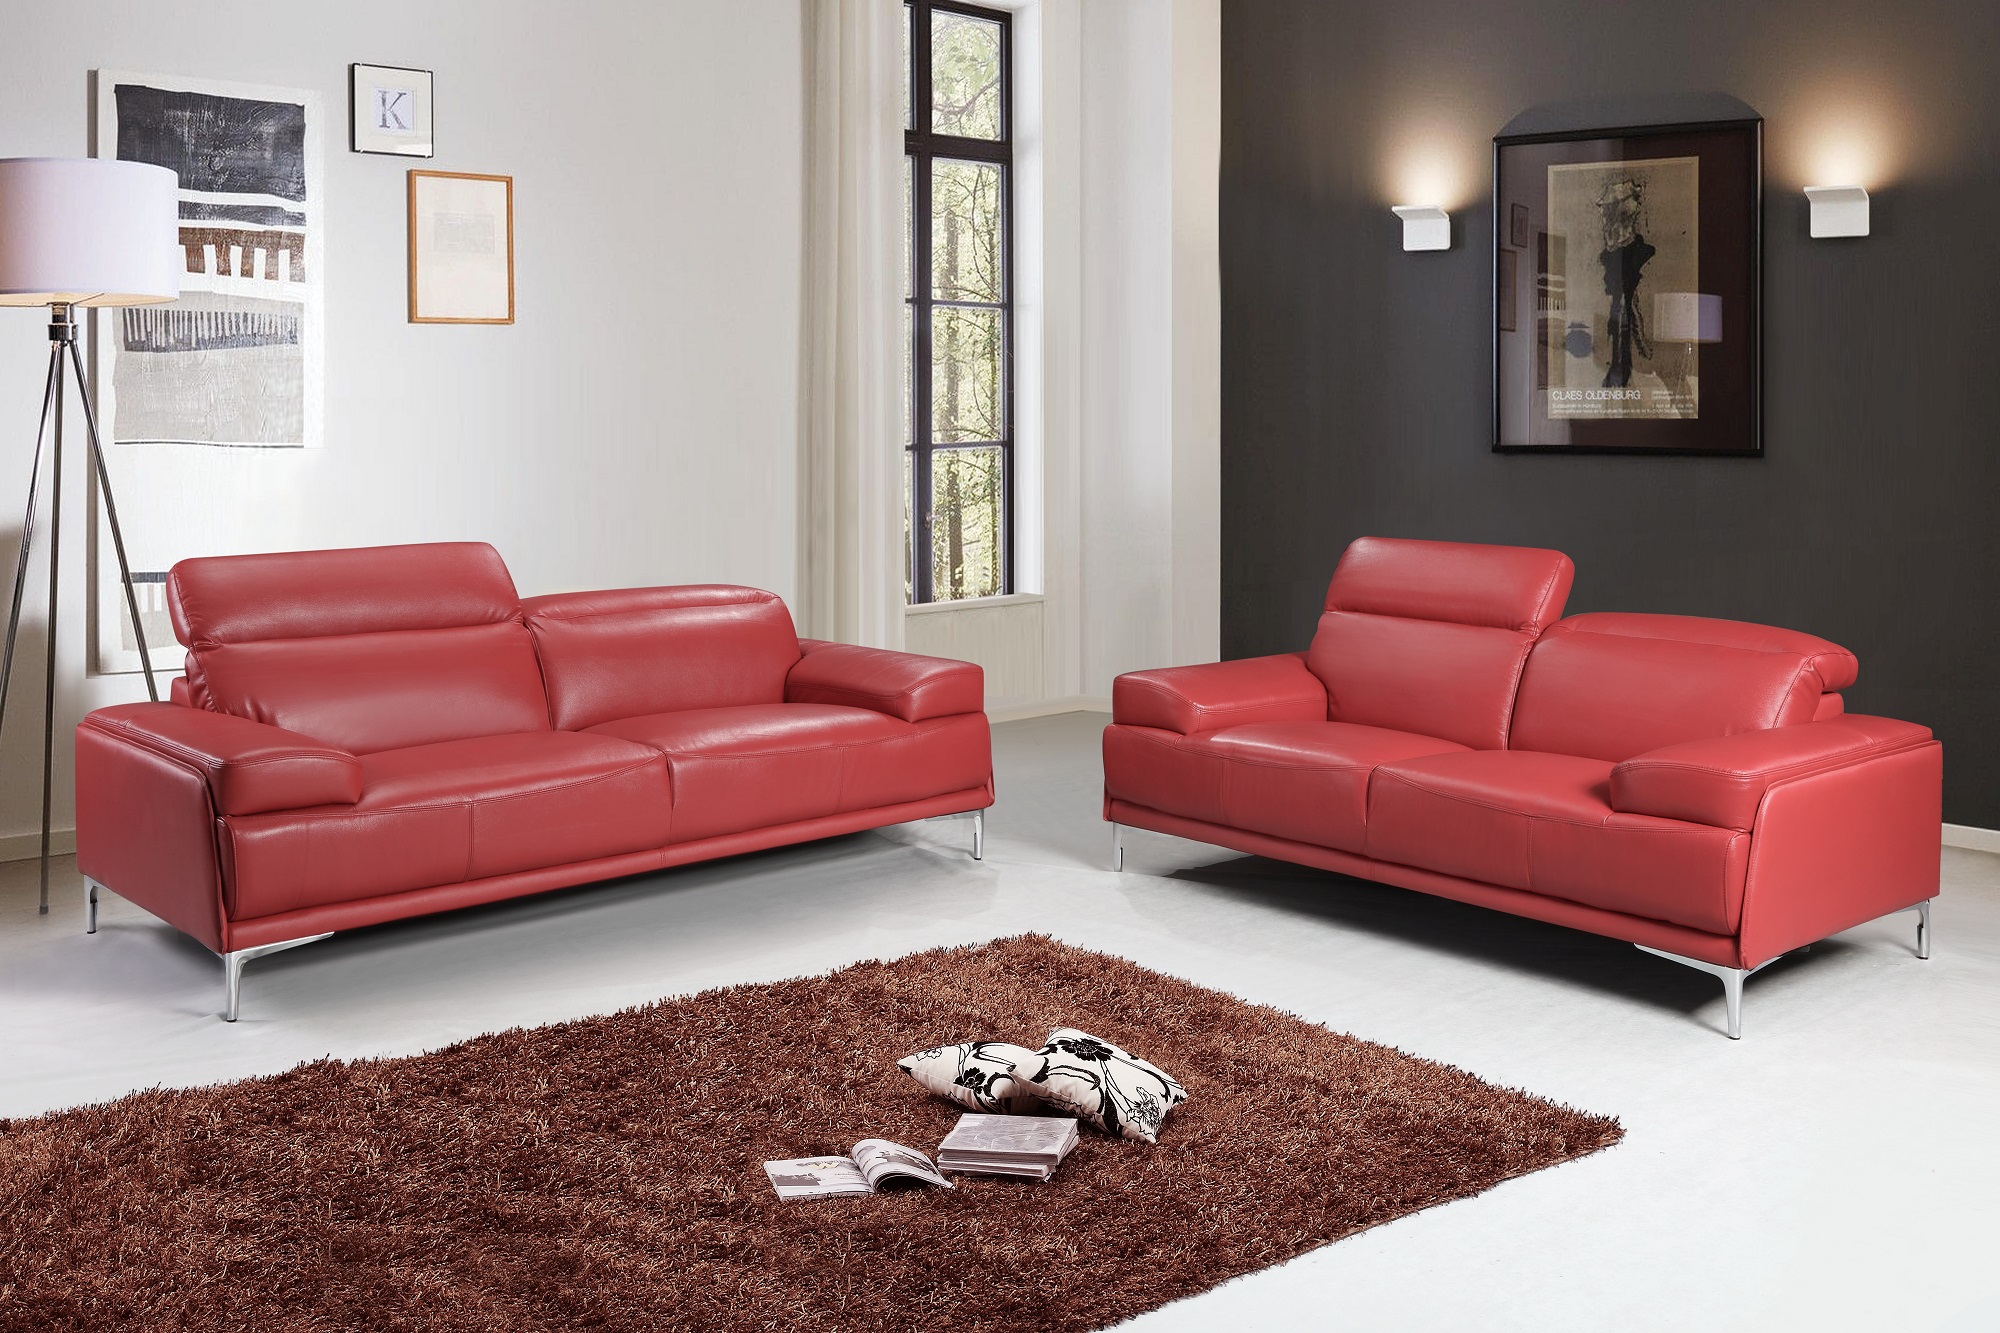 leather sofa with cover